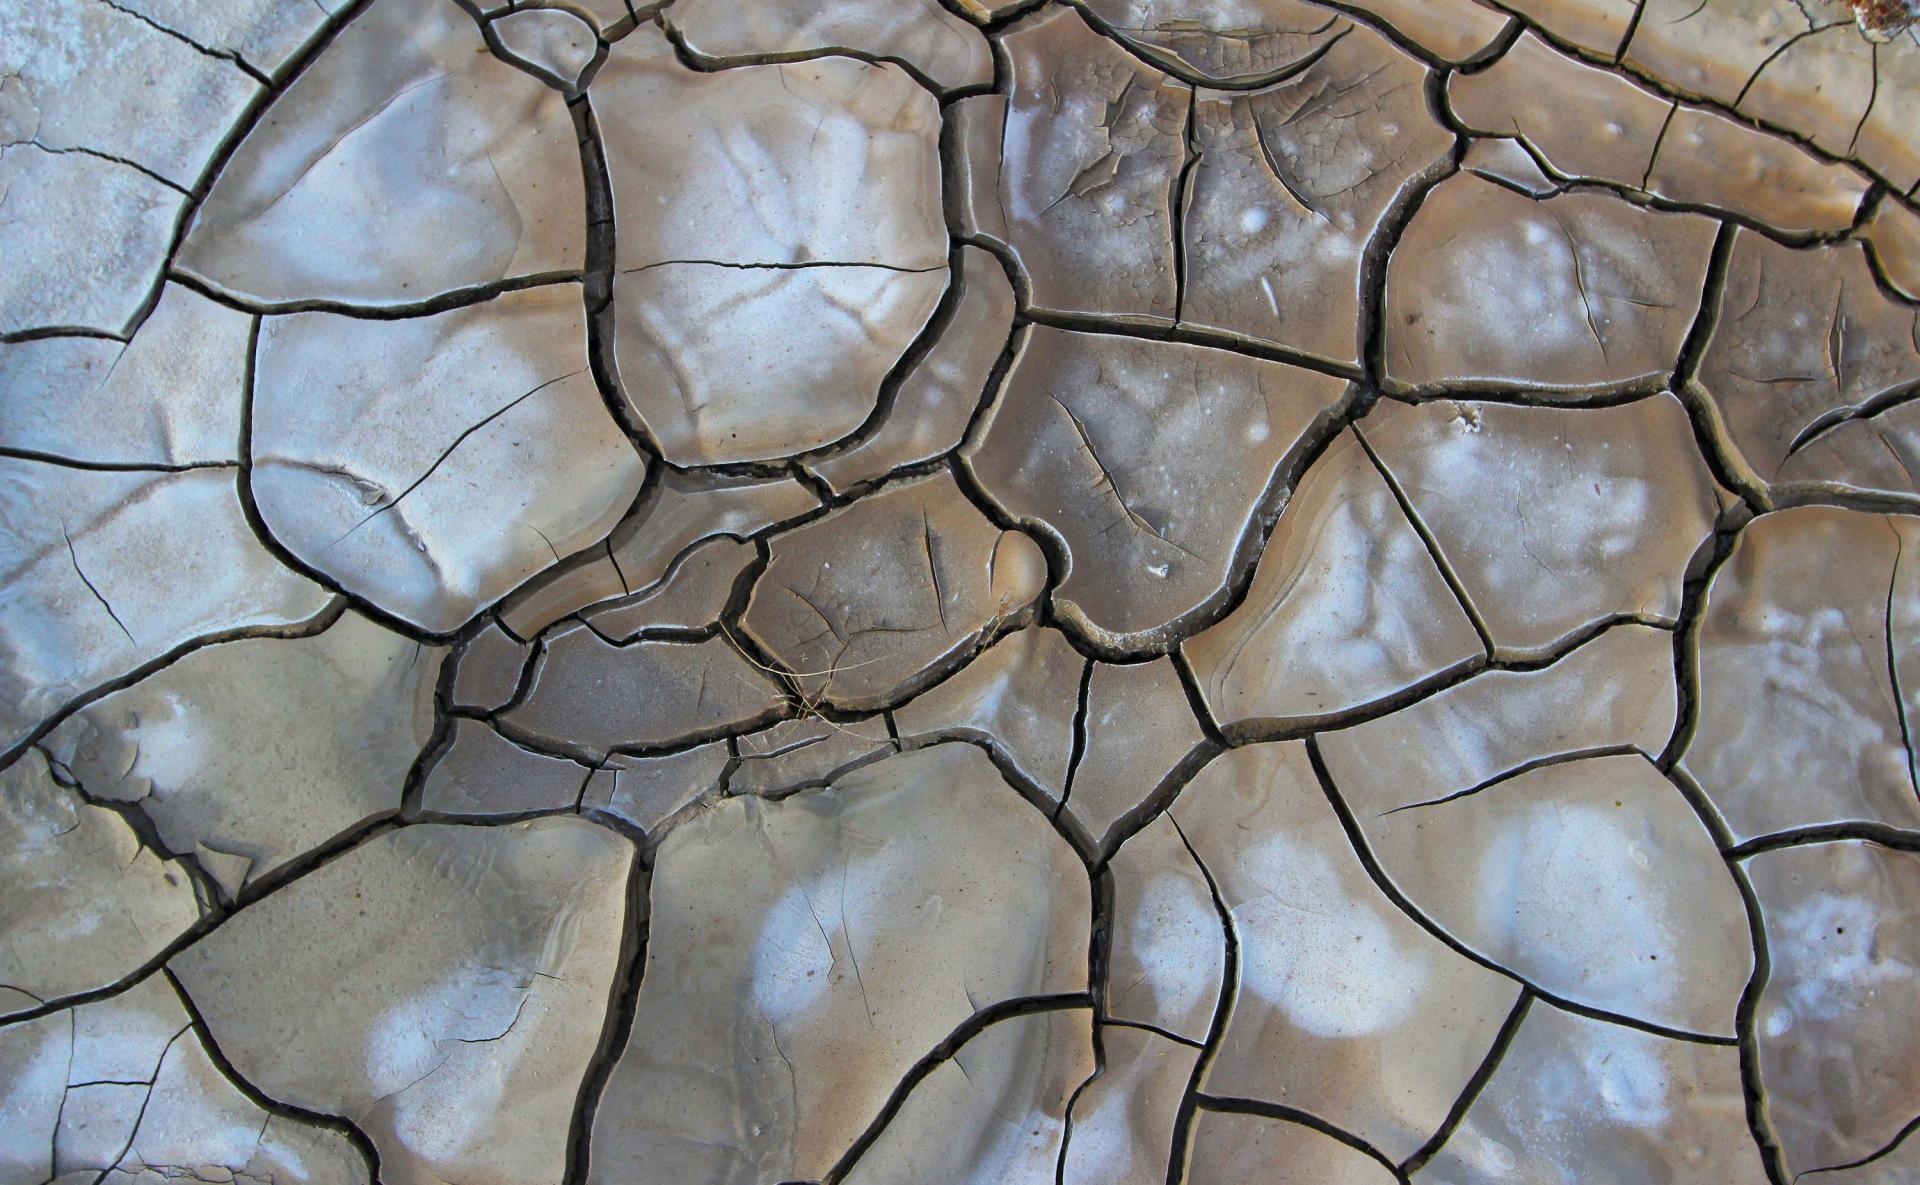 Dry, cracked earth during drought conditions.